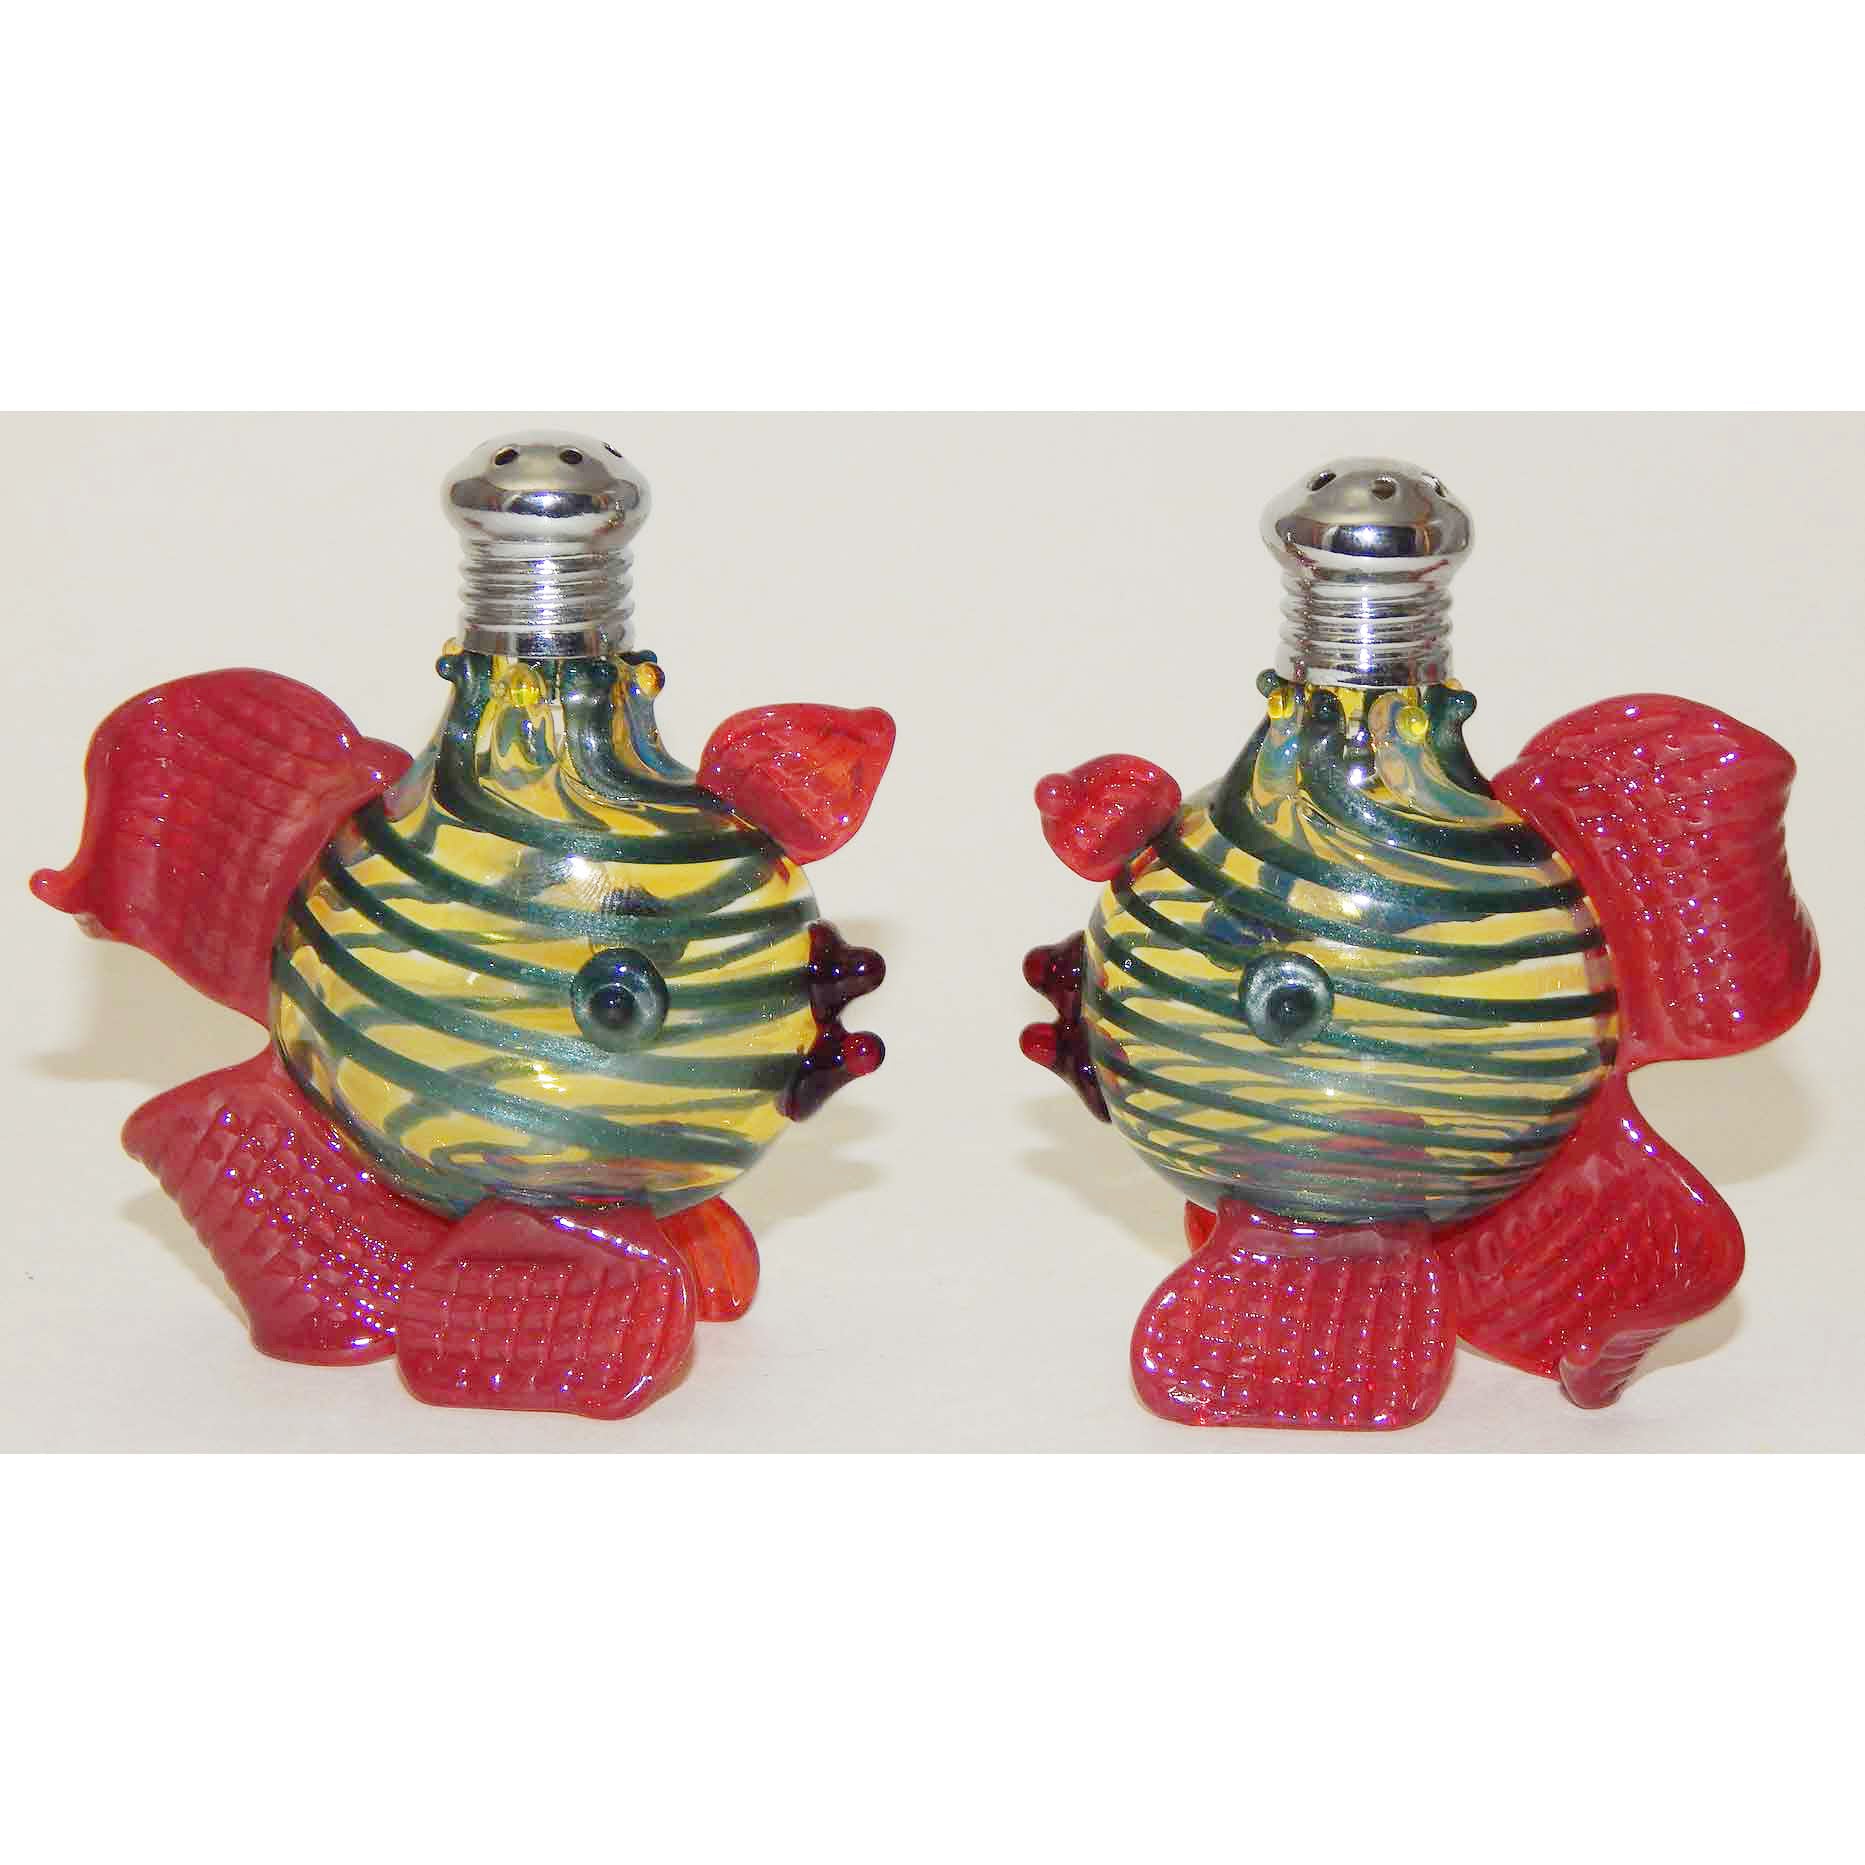 Yellow and Teal Fish Blown Glass Salt and Pepper Shaker 267 by Four Sisters Art Glass